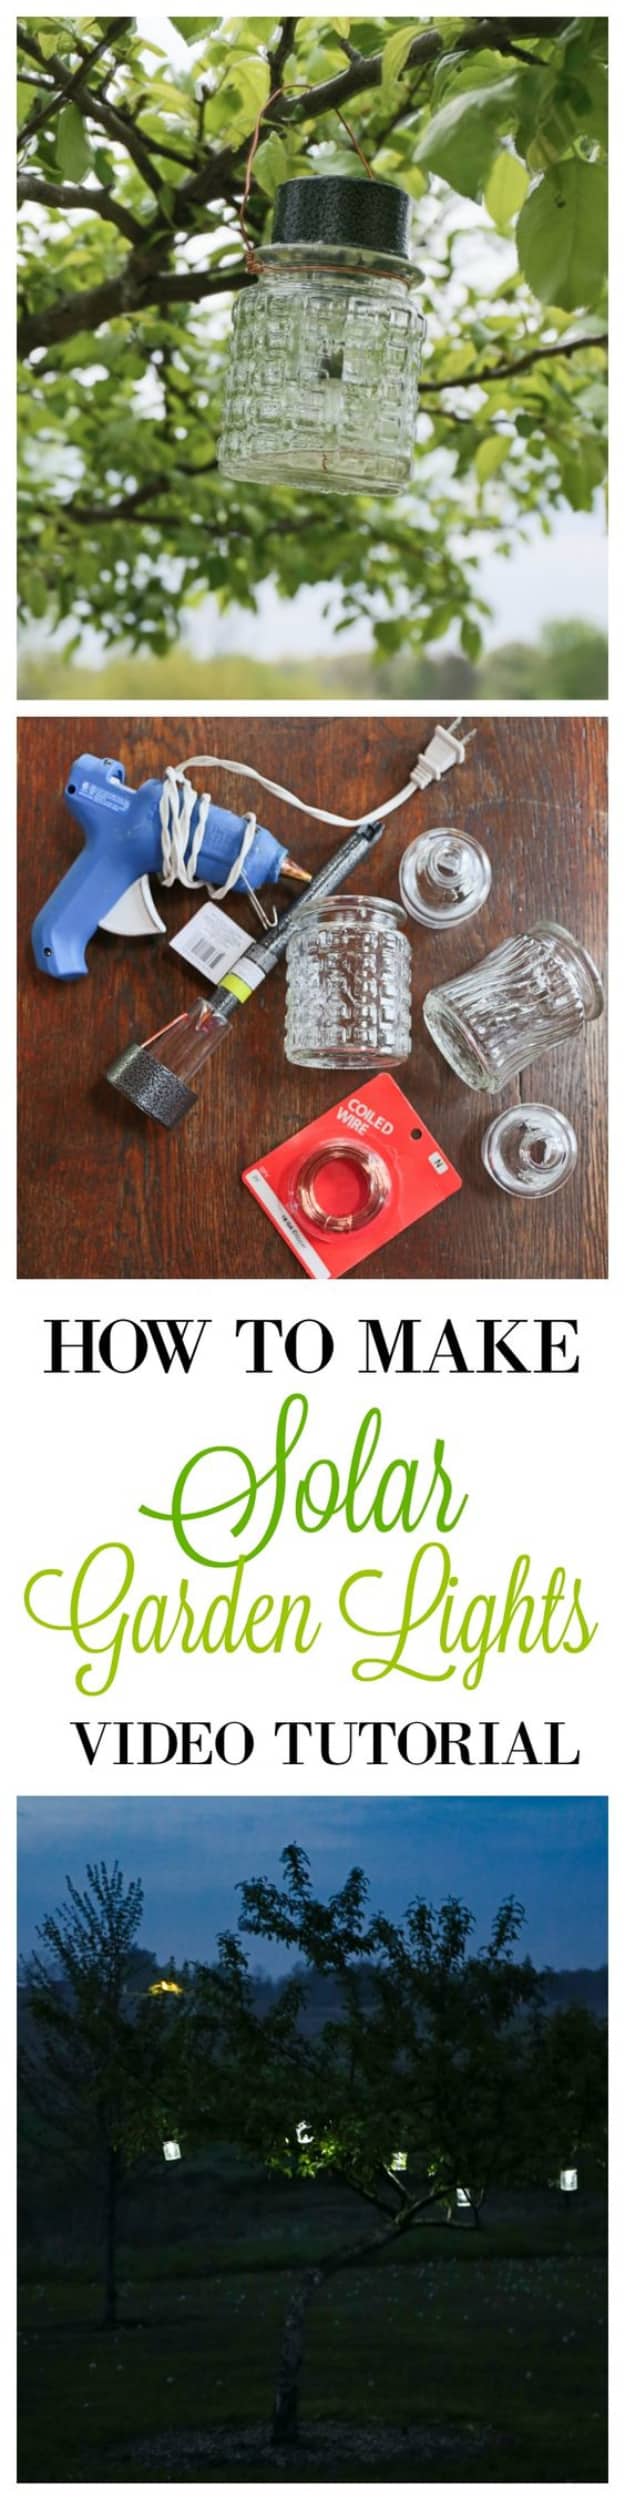 DIY Solar Powered Projects - DIY Solar Garden Lights - Easy Solar Crafts and DYI Ideas for Making Solar Power Things You Can Use To Save Energy - Step by Step Tutorials for Making Things Without Batteries - DIY Projects and Crafts for Men and Women 